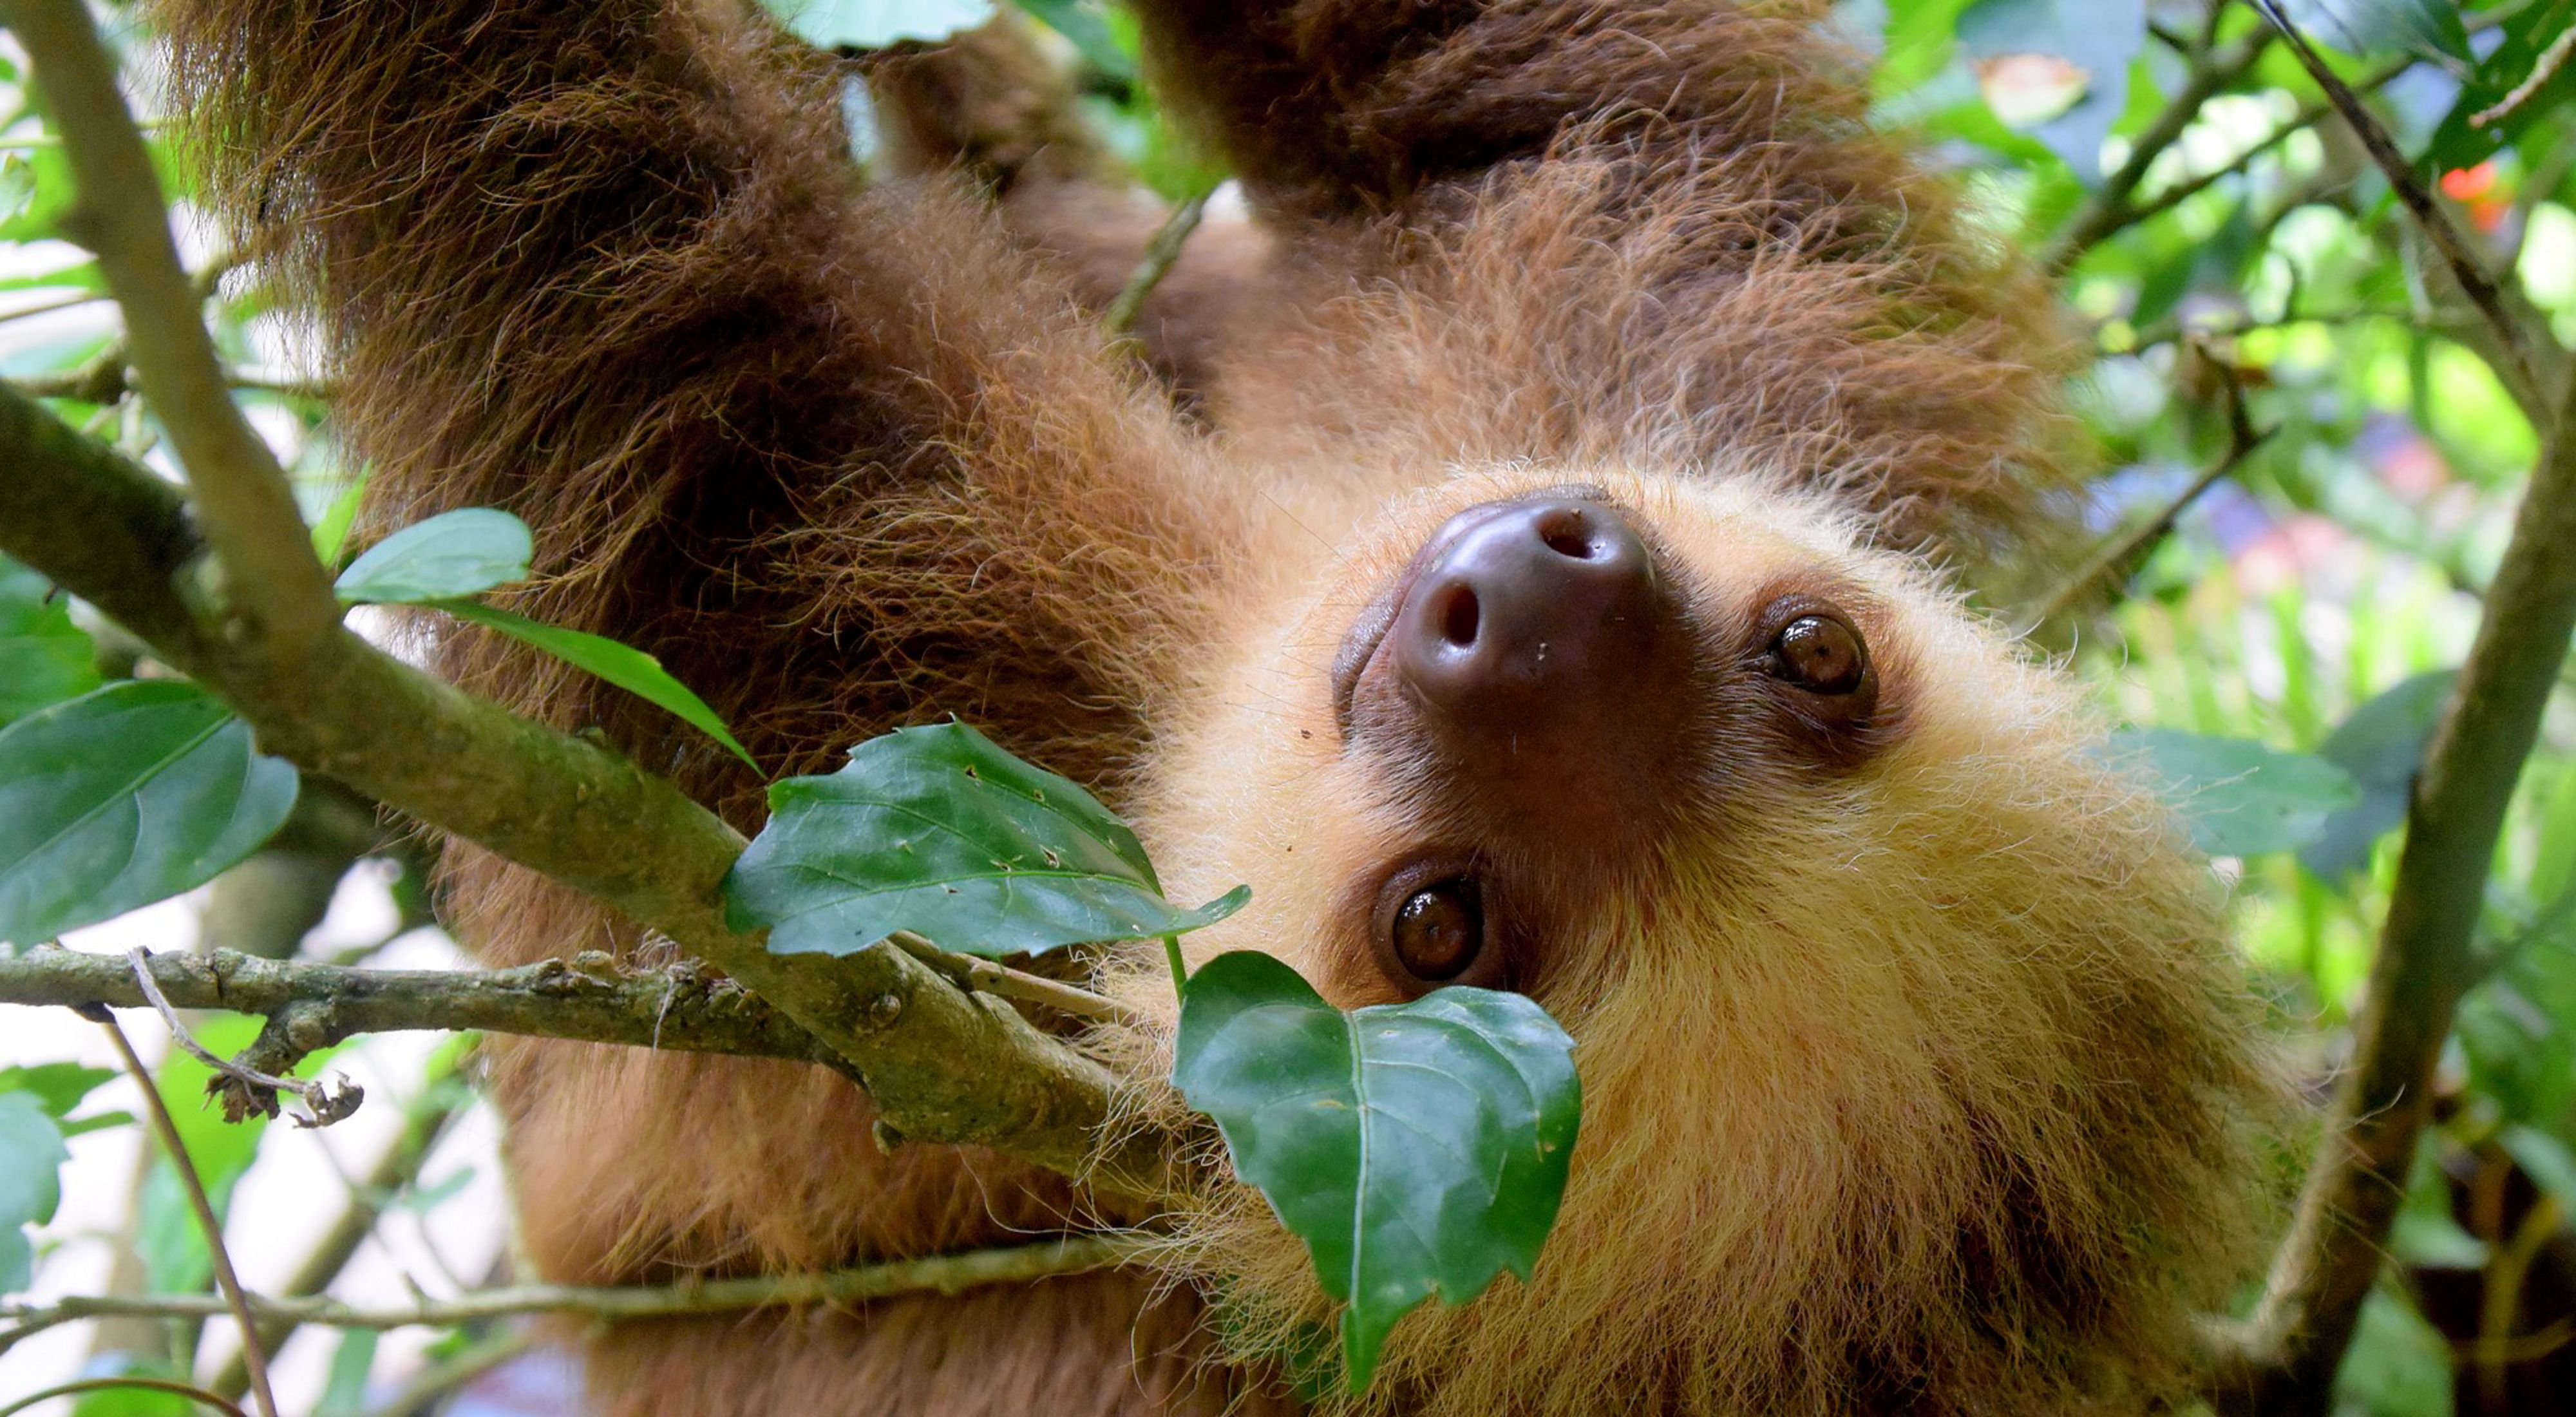 A sloth hangs upside down from a tree branch.